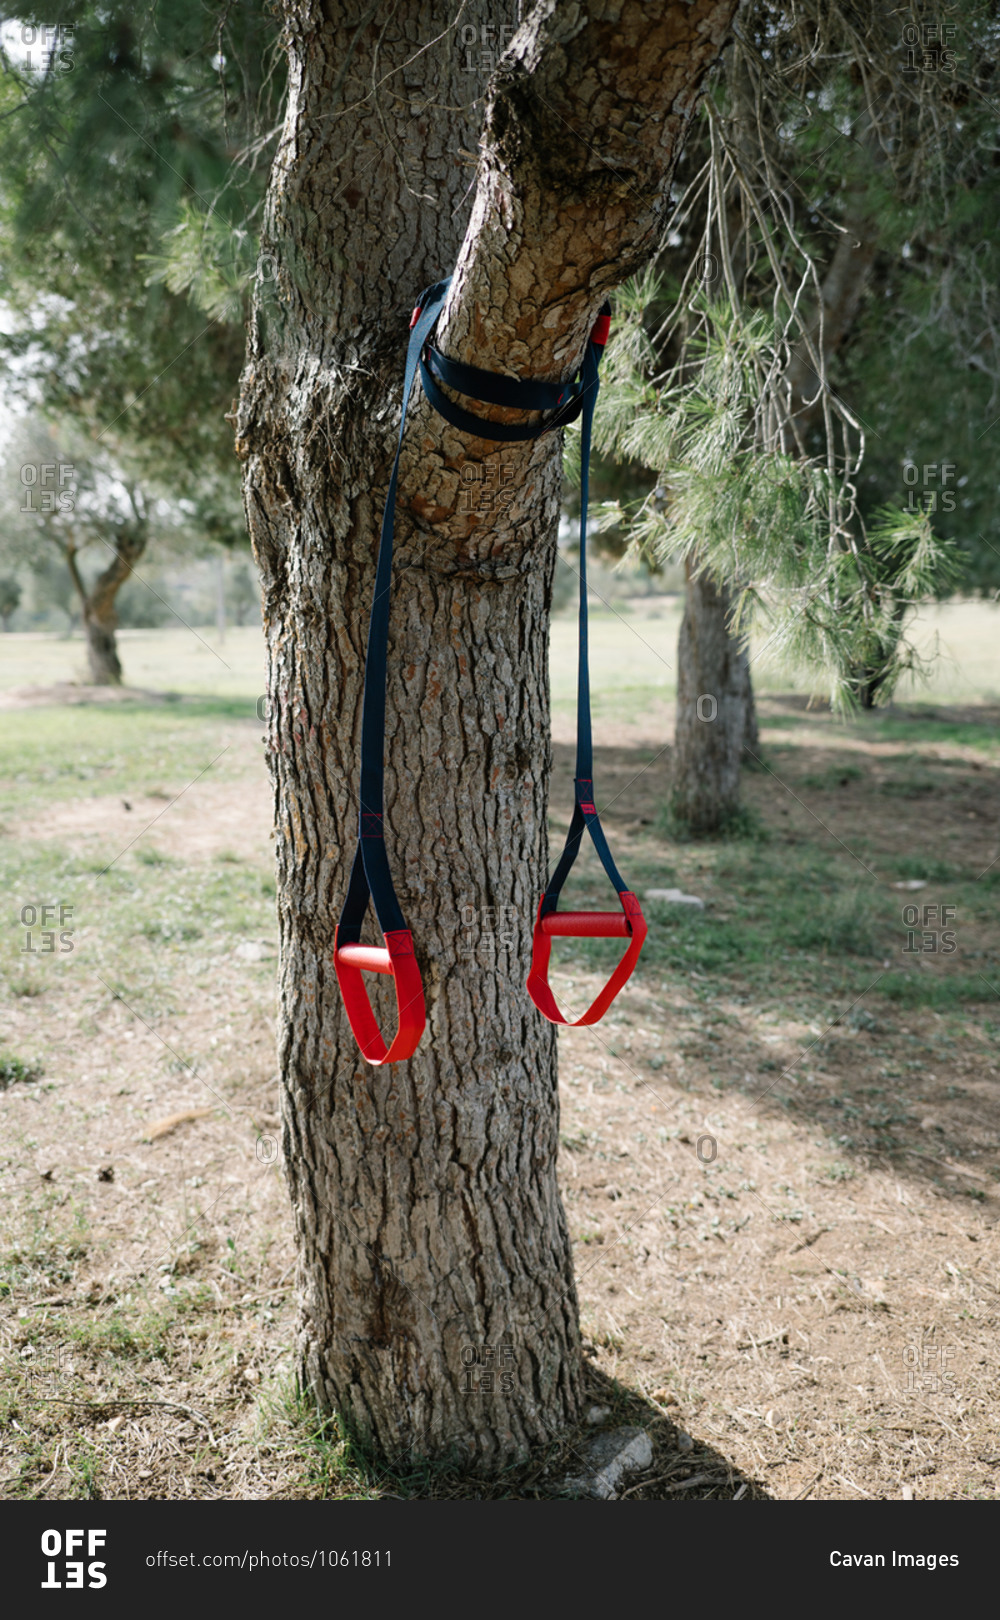 TRX sport team.  strap training ropes hanging on a tree